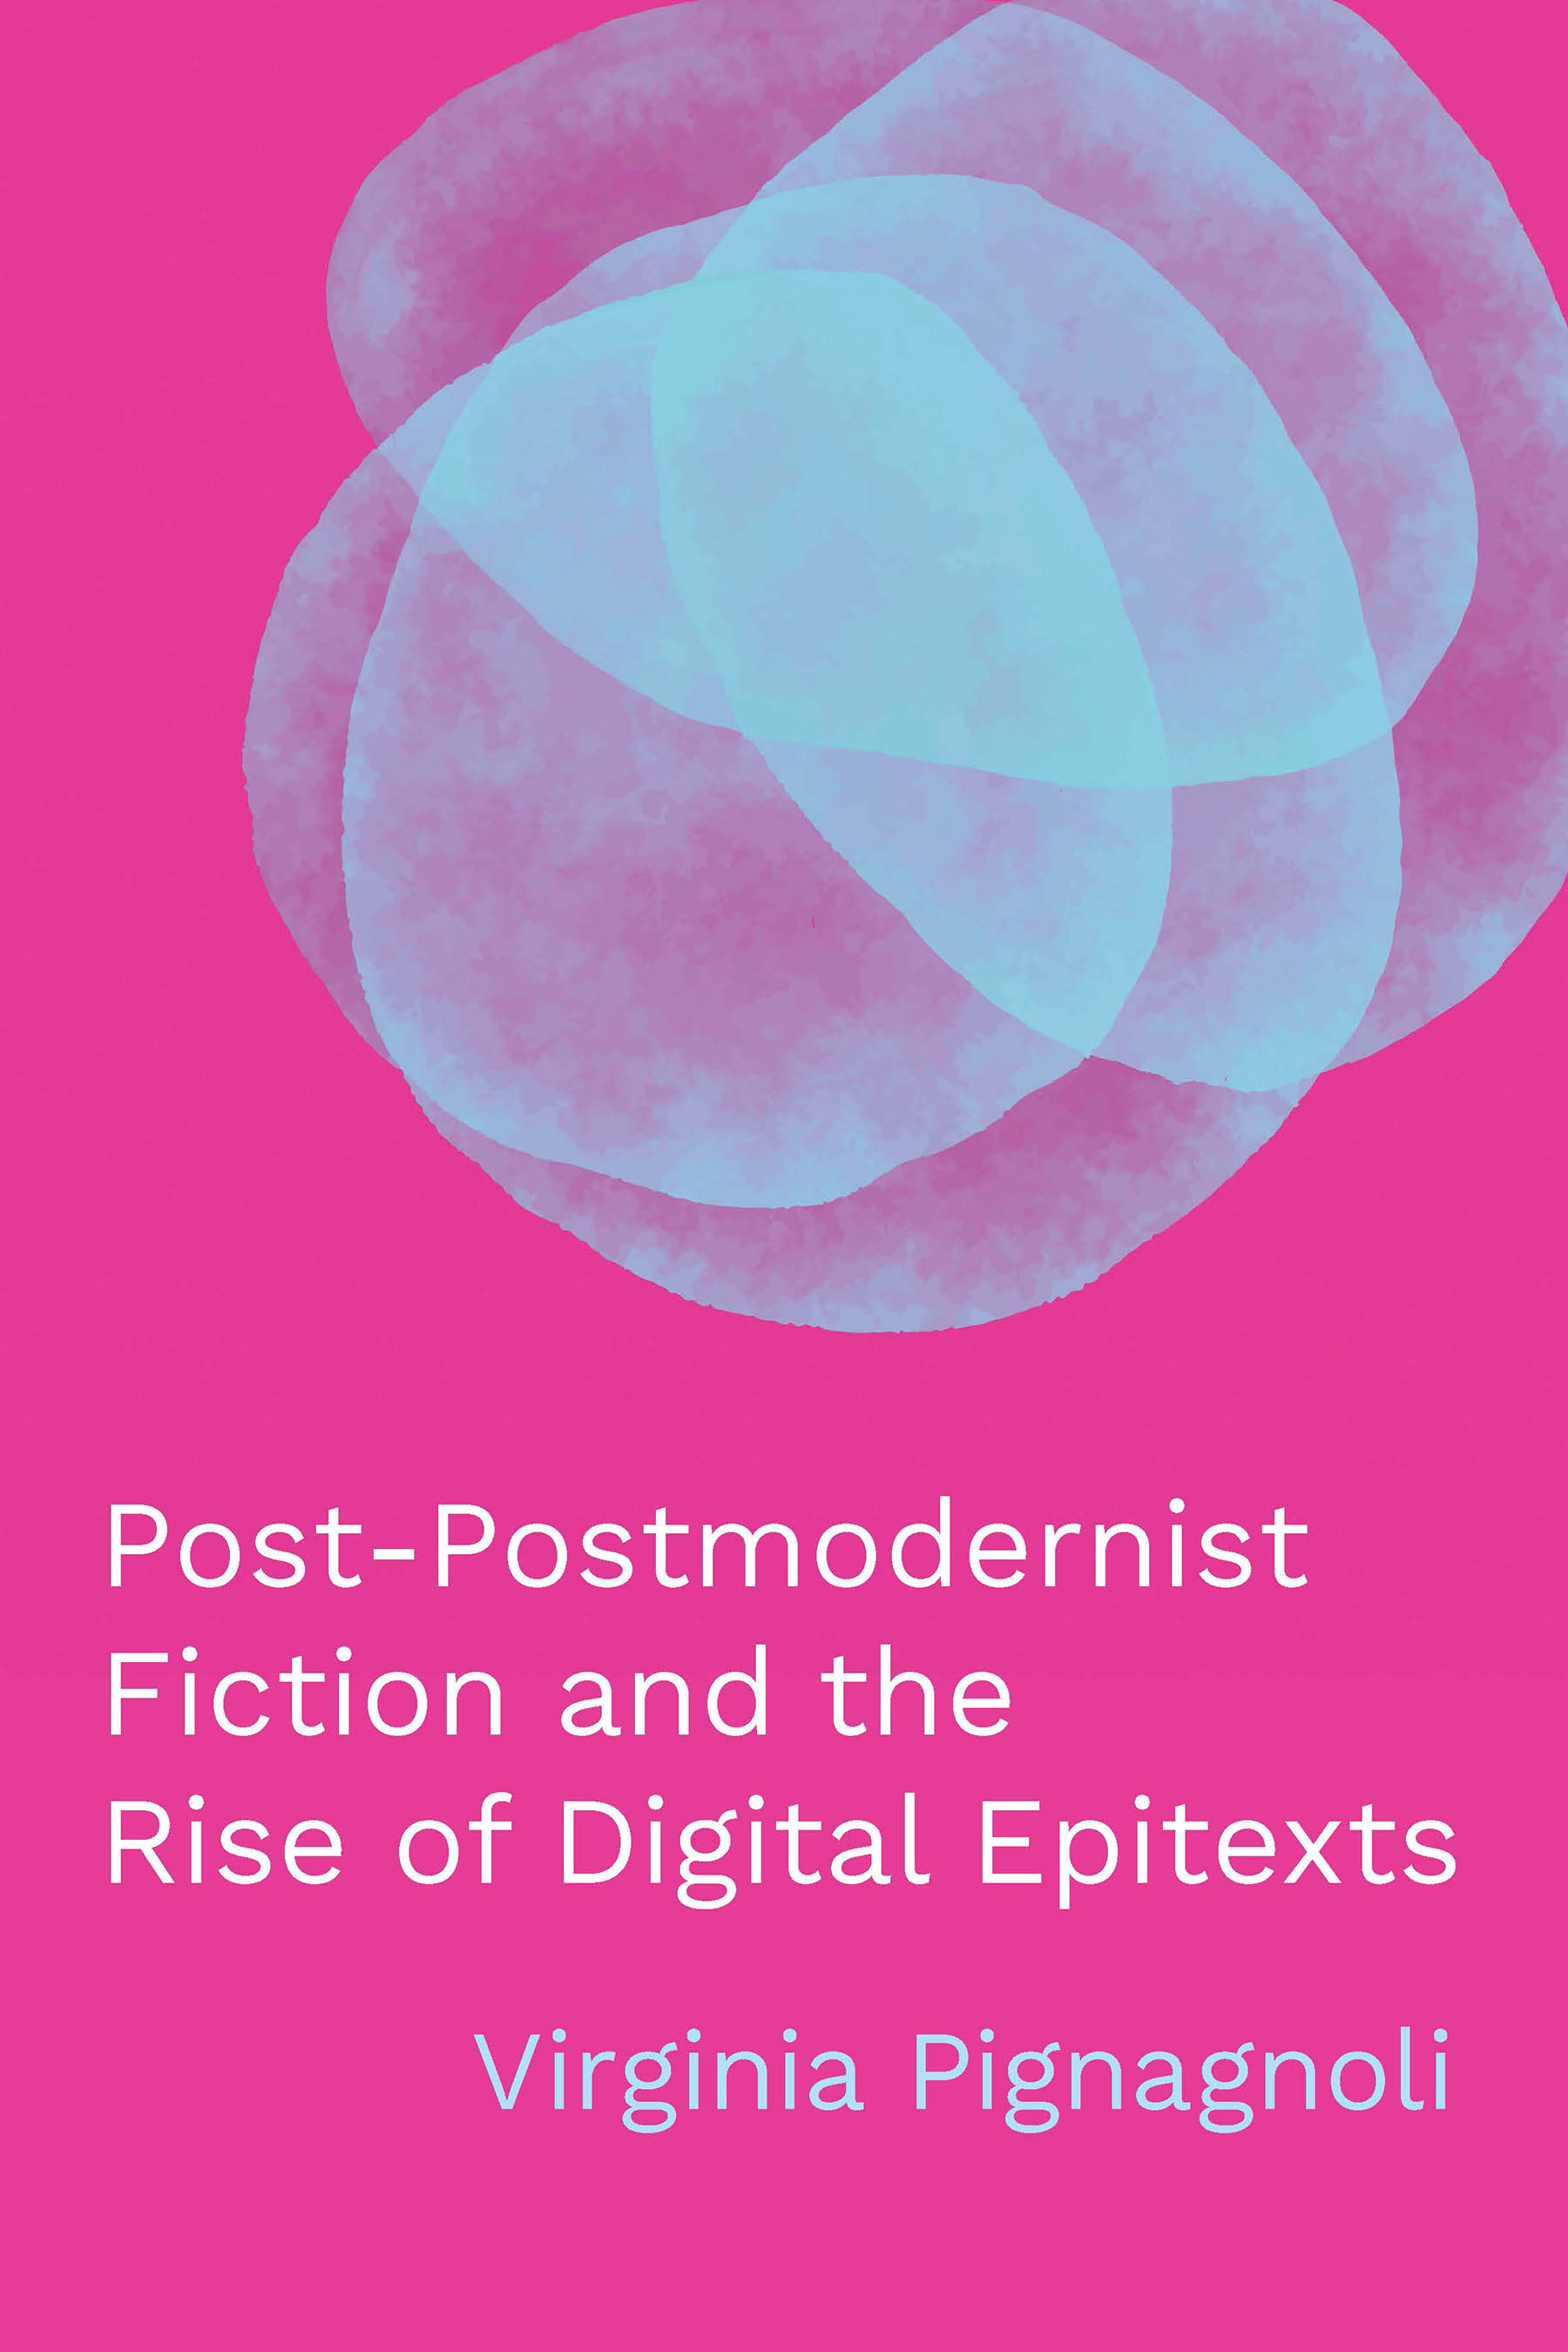 Post-Postmodernist Fiction and the Rise of Digital Epitexts